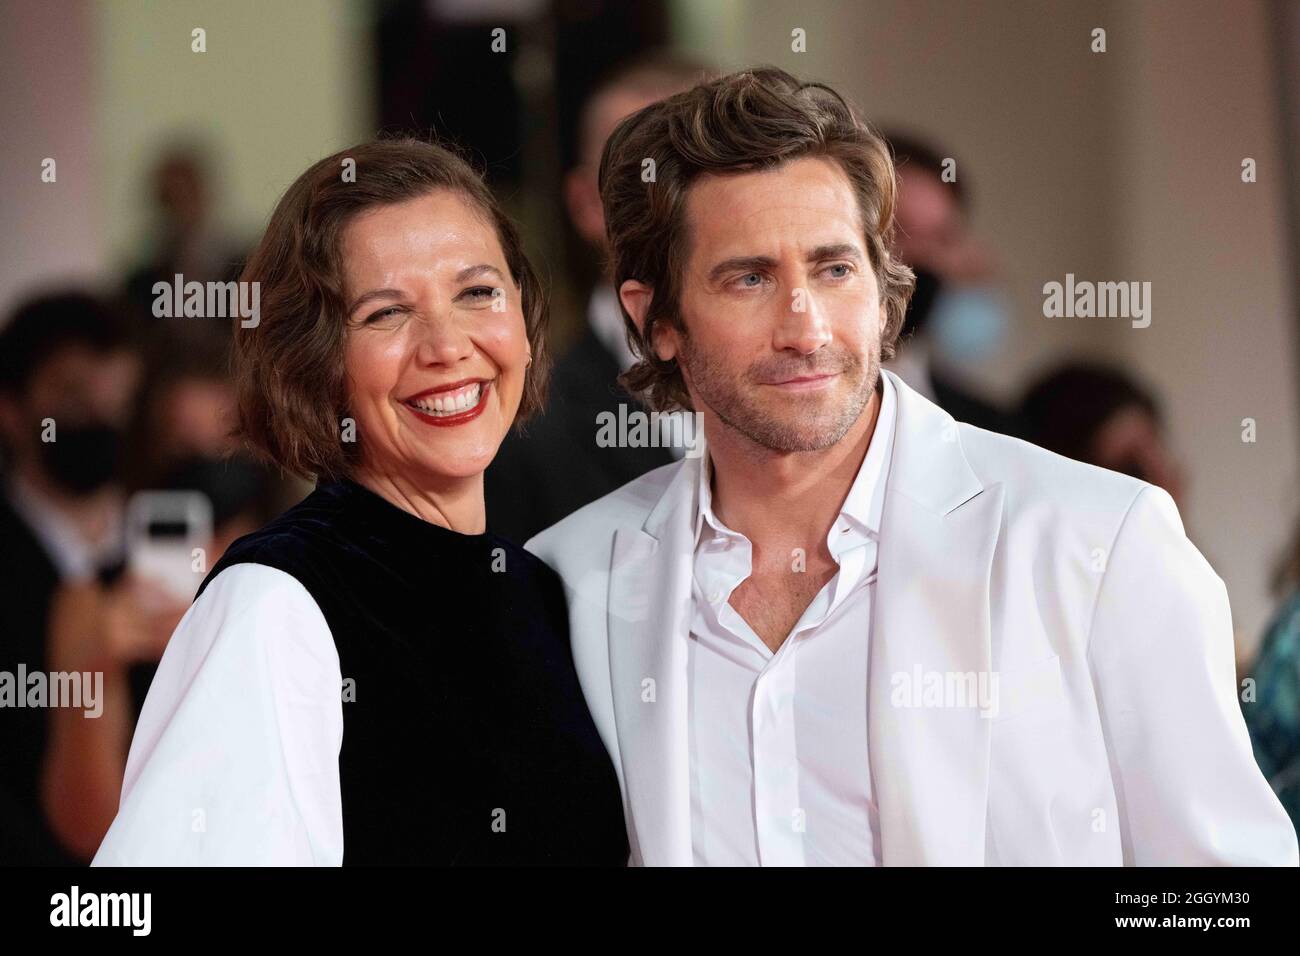 Lido di Venezia, Italy, 3rd september 2021 : Maggie Gyllenhaal with her brother Jake Gyllenhaal walks the red carpet ahead of the 'The Lost Daughter' screening during the 78th International Venice Film Festival. Credit: Luigi de Pompeis/Alamy Live News Stock Photo